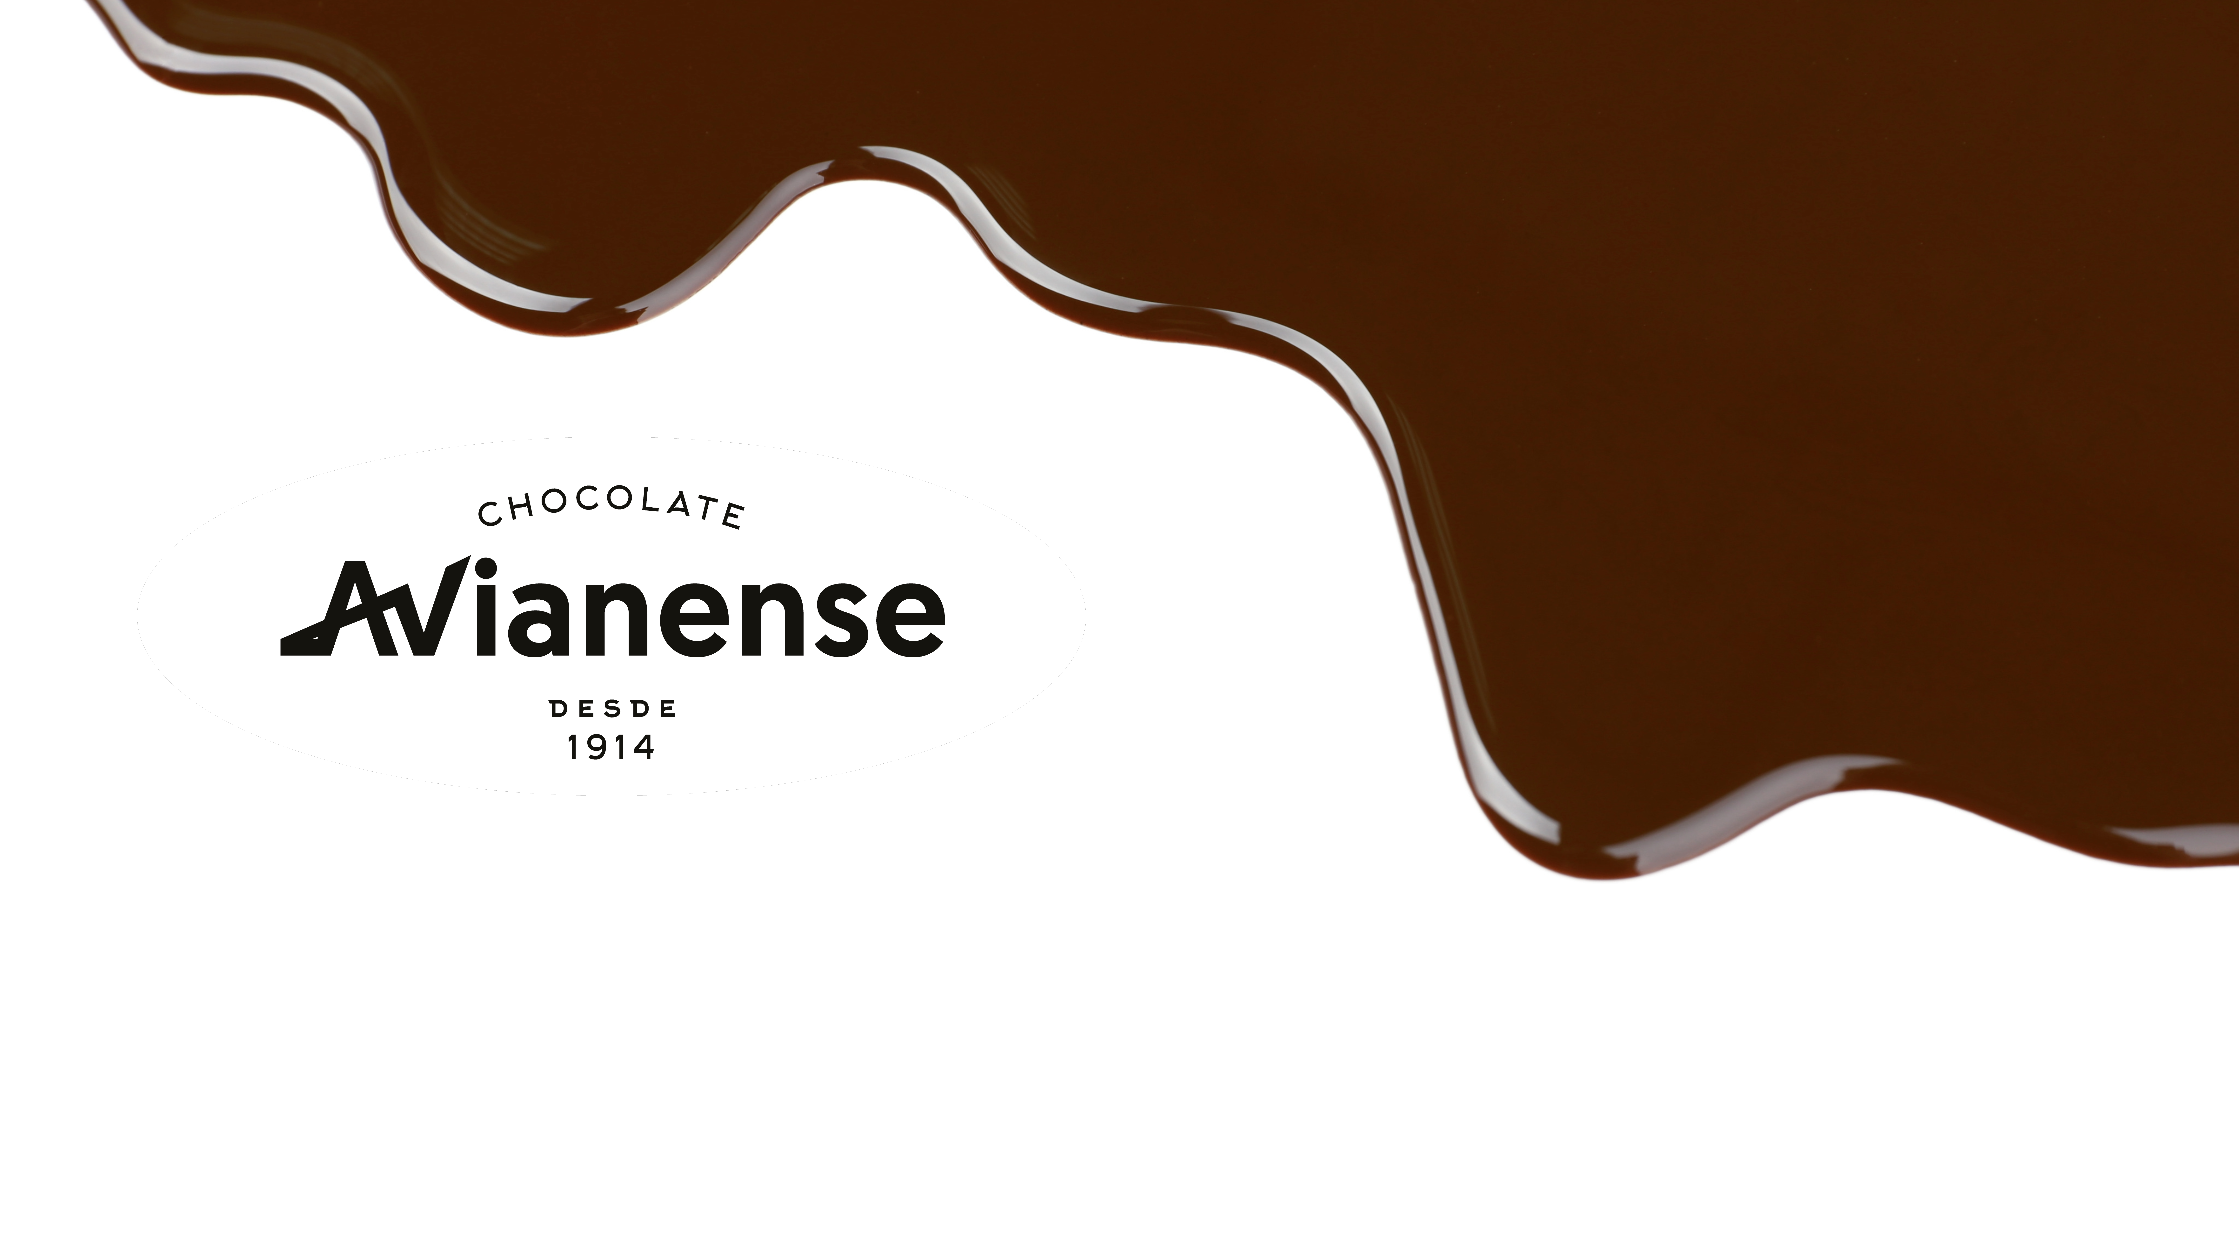 An illustration showing a smooth wave of melted chocolate flowing from the top right corner. Text on the left reads "Chocolate Avianense Desde 1914" in black and brown letters, indicating the brand and year since establishment. The background is white.